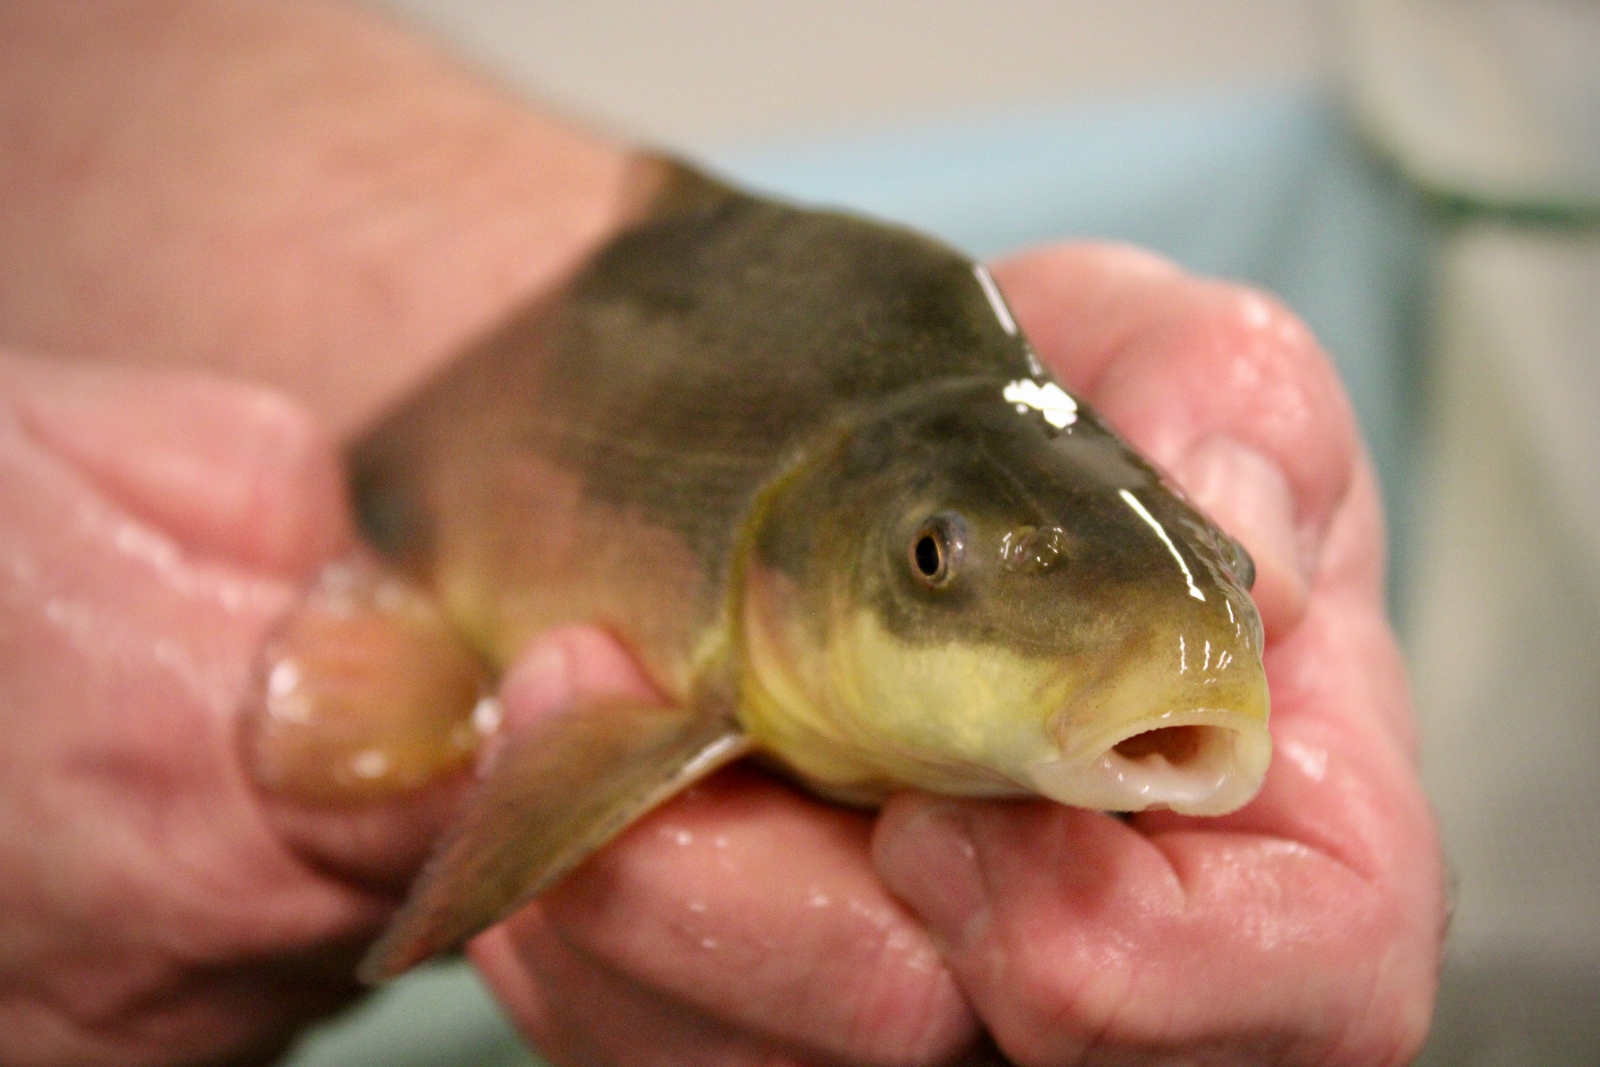 A pair of hands holds a green and yellow fish puckering its mouth.